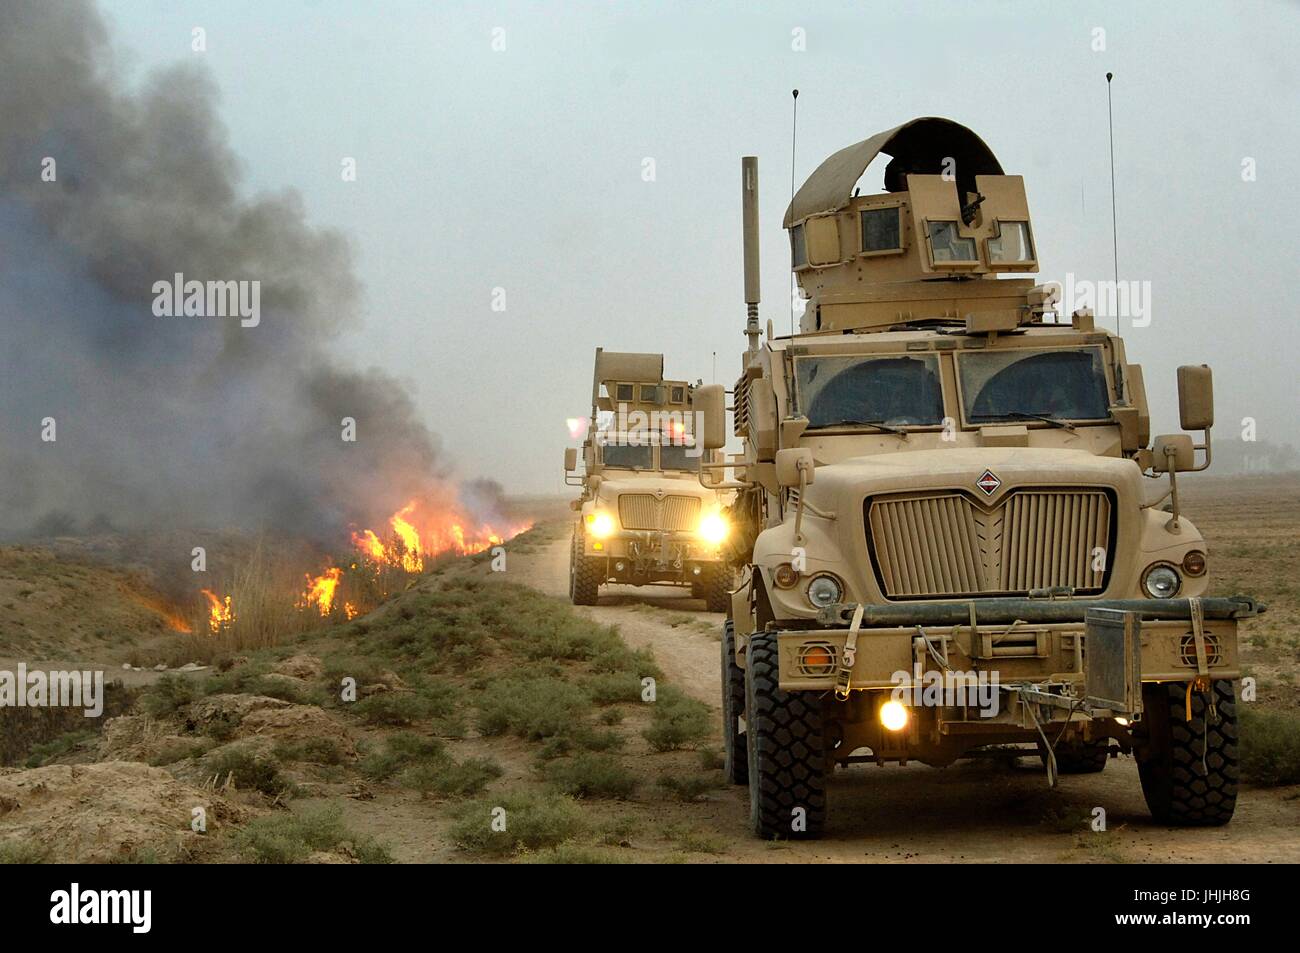 U.S. soldiers conduct a mounted patrol in mine-resistant ambush-protected vehicles after setting canal vegetation ablaze during the Iraq war July 30, 2008 in Tahwilla, Iraq.    (photo by David J. Marshall  via Planetpix) Stock Photo